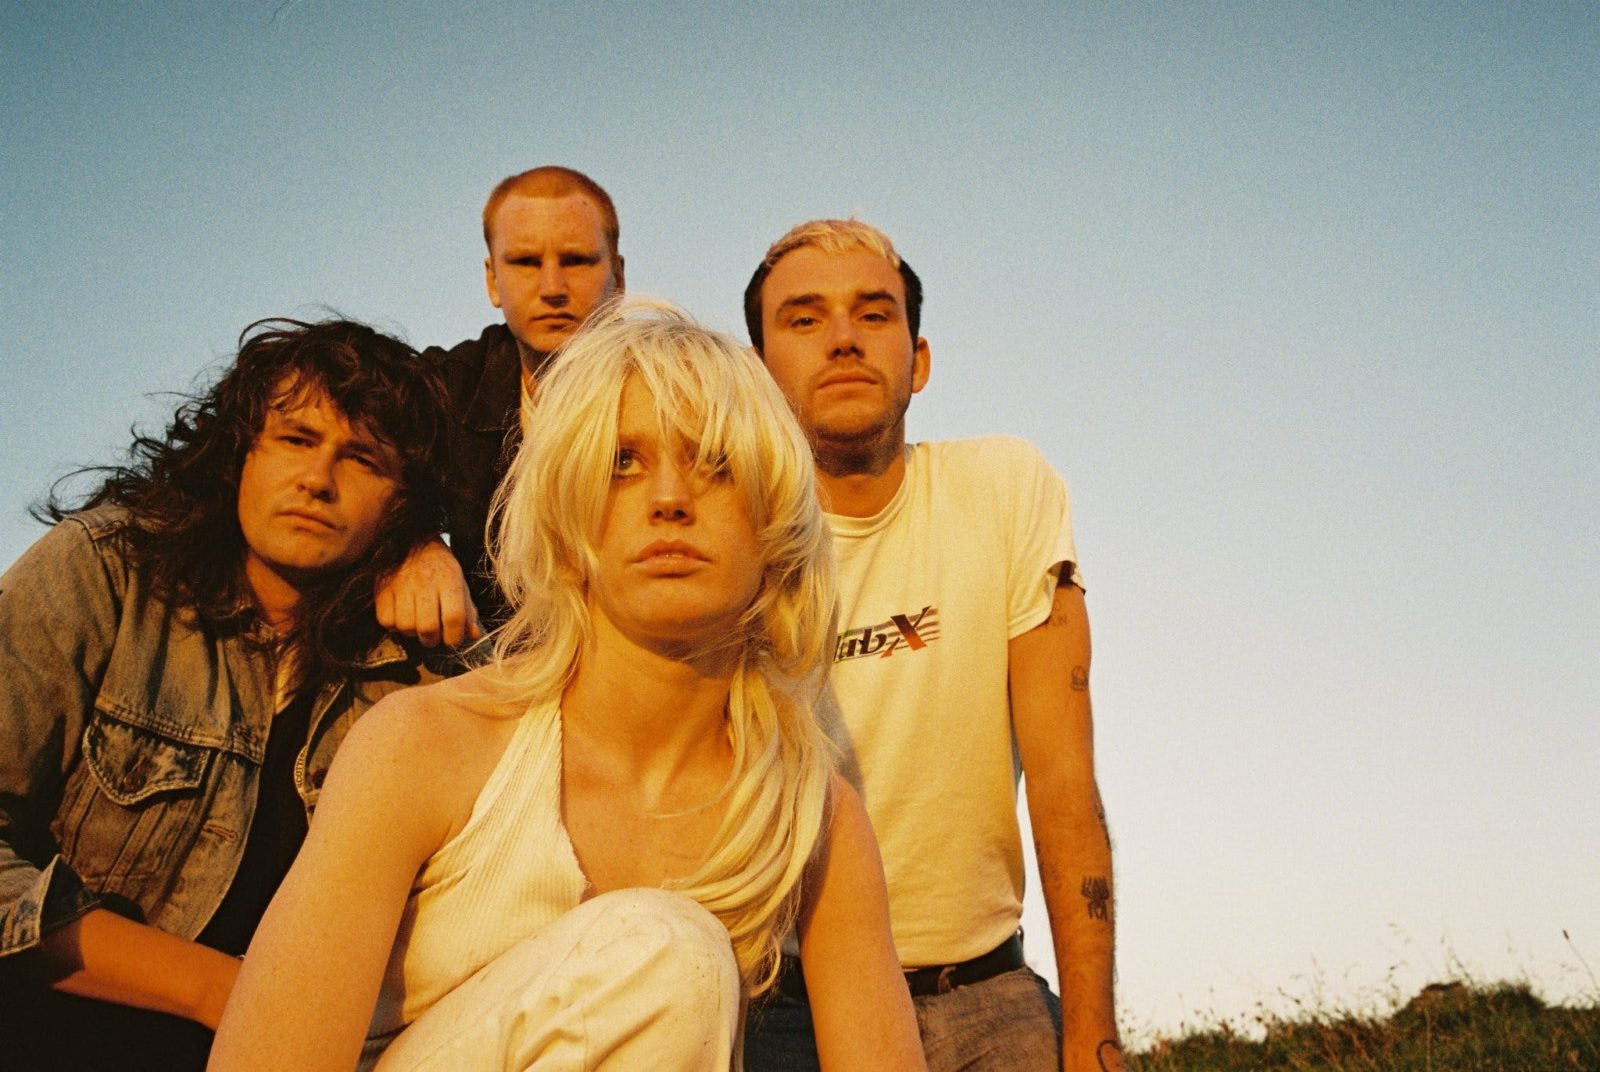 Group photo of Amyl and The Sniffers outside